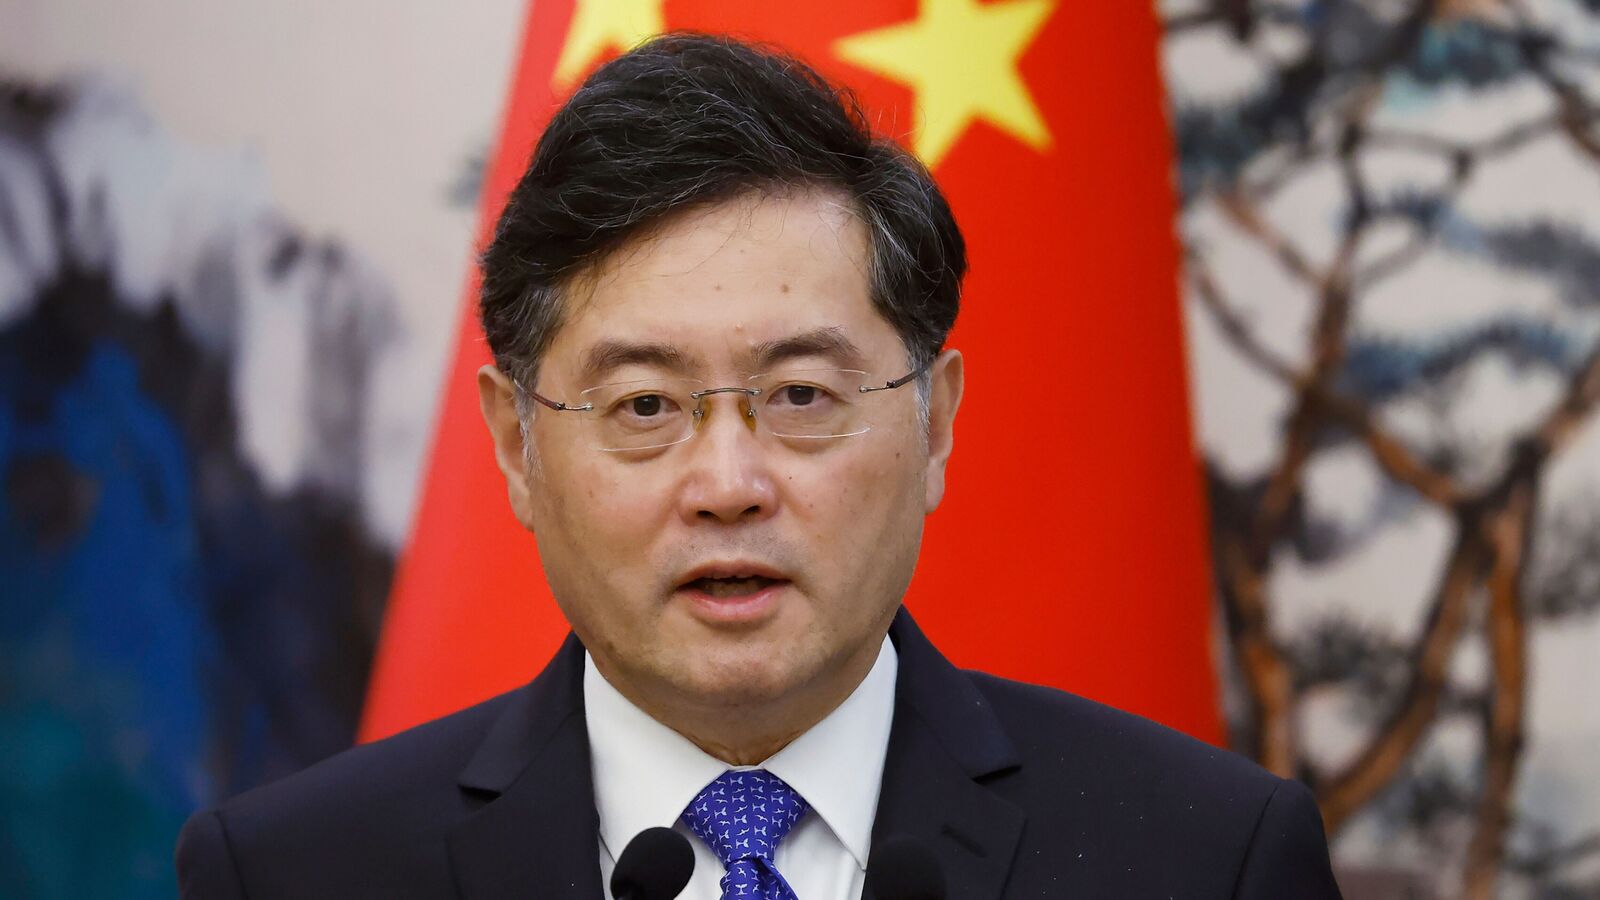 Missing Chinese Foreign Minister Sparks Speculations